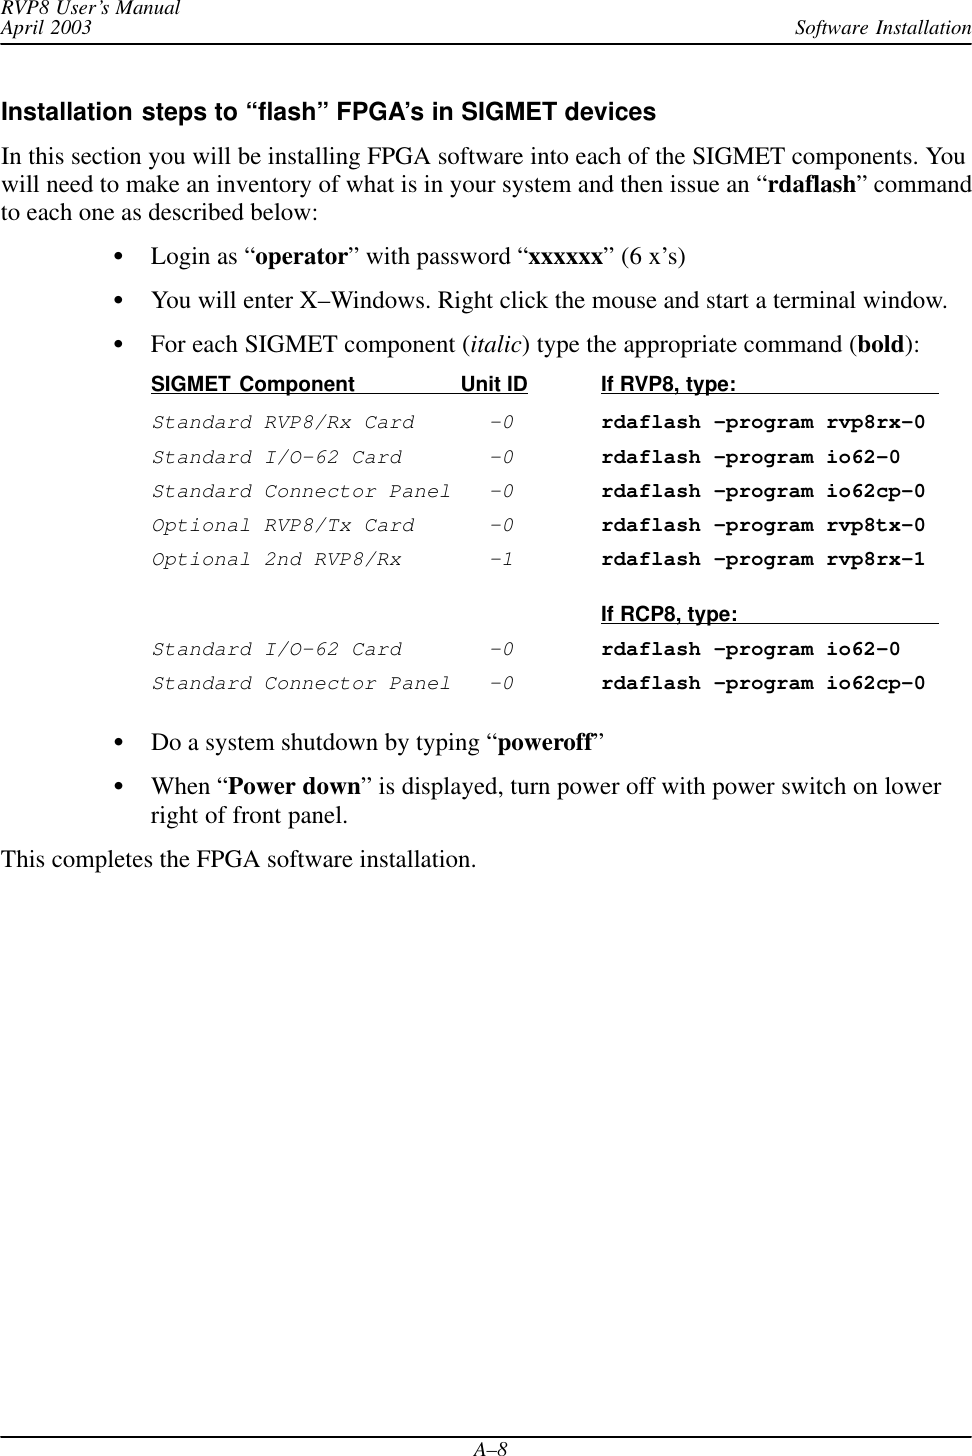 Software InstallationRVP8 User’s ManualApril 2003A–8Installation steps to “flash” FPGA’s in SIGMET devicesIn this section you will be installing FPGA software into each of the SIGMET components. Youwill need to make an inventory of what is in your system and then issue an “rdaflash” commandto each one as described below:Login as “operator” with password “xxxxxx” (6 x’s)You will enter X–Windows. Right click the mouse and start a terminal window.For each SIGMET component (italic) type the appropriate command (bold):SIGMET Component               Unit ID If RVP8, type:Standard RVP8/Rx Card  –0rdaflash –program rvp8rx–0Standard I/O–62 Card  –0rdaflash –program io62–0Standard Connector Panel  –0rdaflash –program io62cp–0Optional RVP8/Tx Card  –0rdaflash –program rvp8tx–0Optional 2nd RVP8/Rx  –1rdaflash –program rvp8rx–1If RCP8, type:Standard I/O–62 Card  –0rdaflash –program io62–0Standard Connector Panel  –0rdaflash –program io62cp–0Do a system shutdown by typing “poweroff”When “Power down” is displayed, turn power off with power switch on lowerright of front panel.This completes the FPGA software installation.